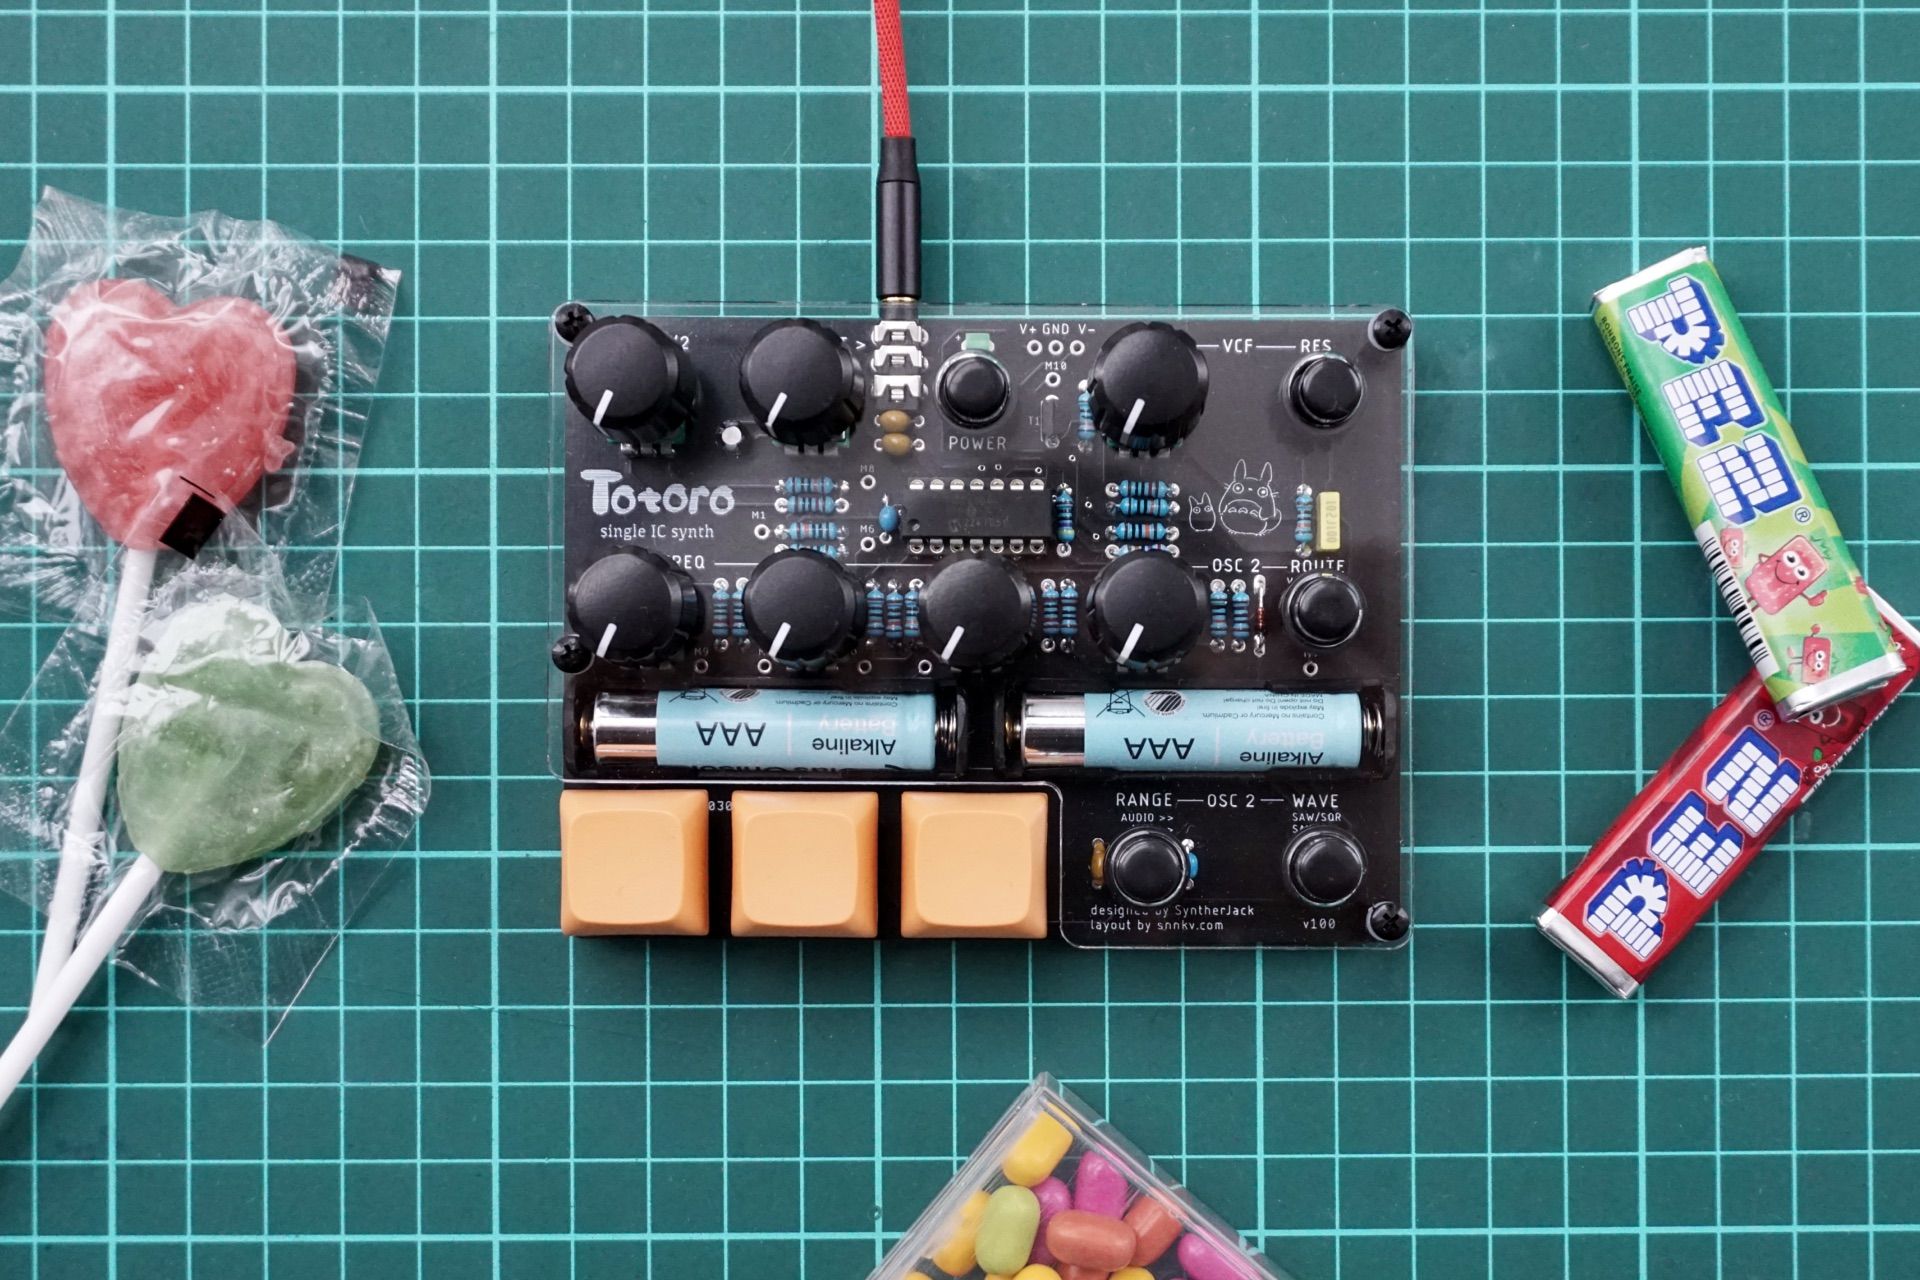 Totoro synth